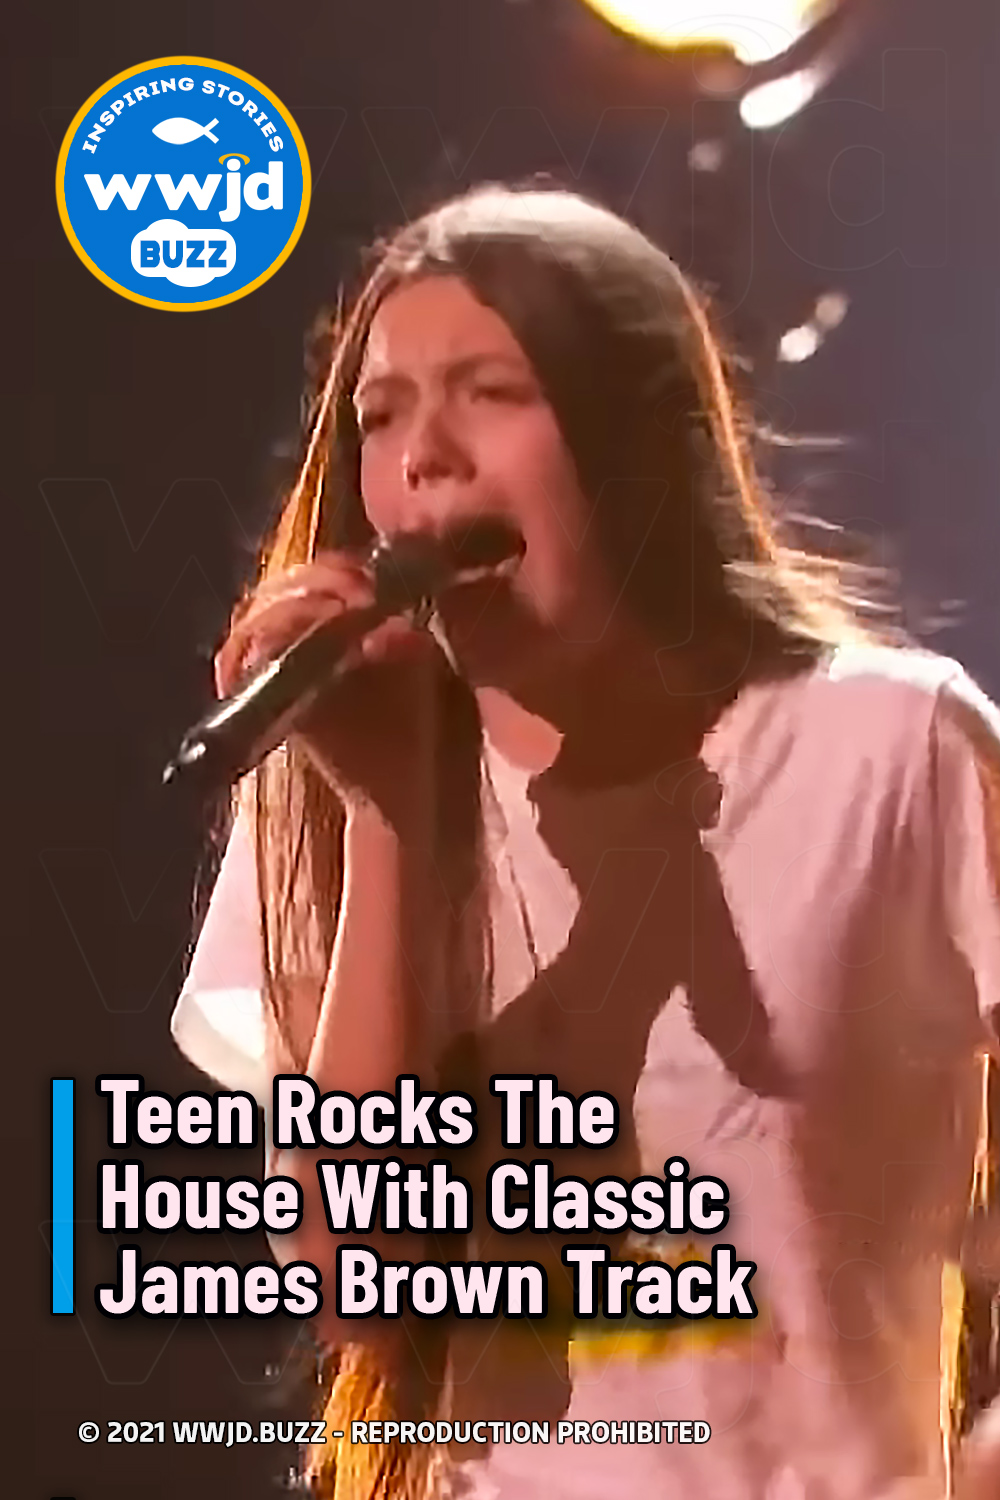 Teen Rocks The House With Classic James Brown Track